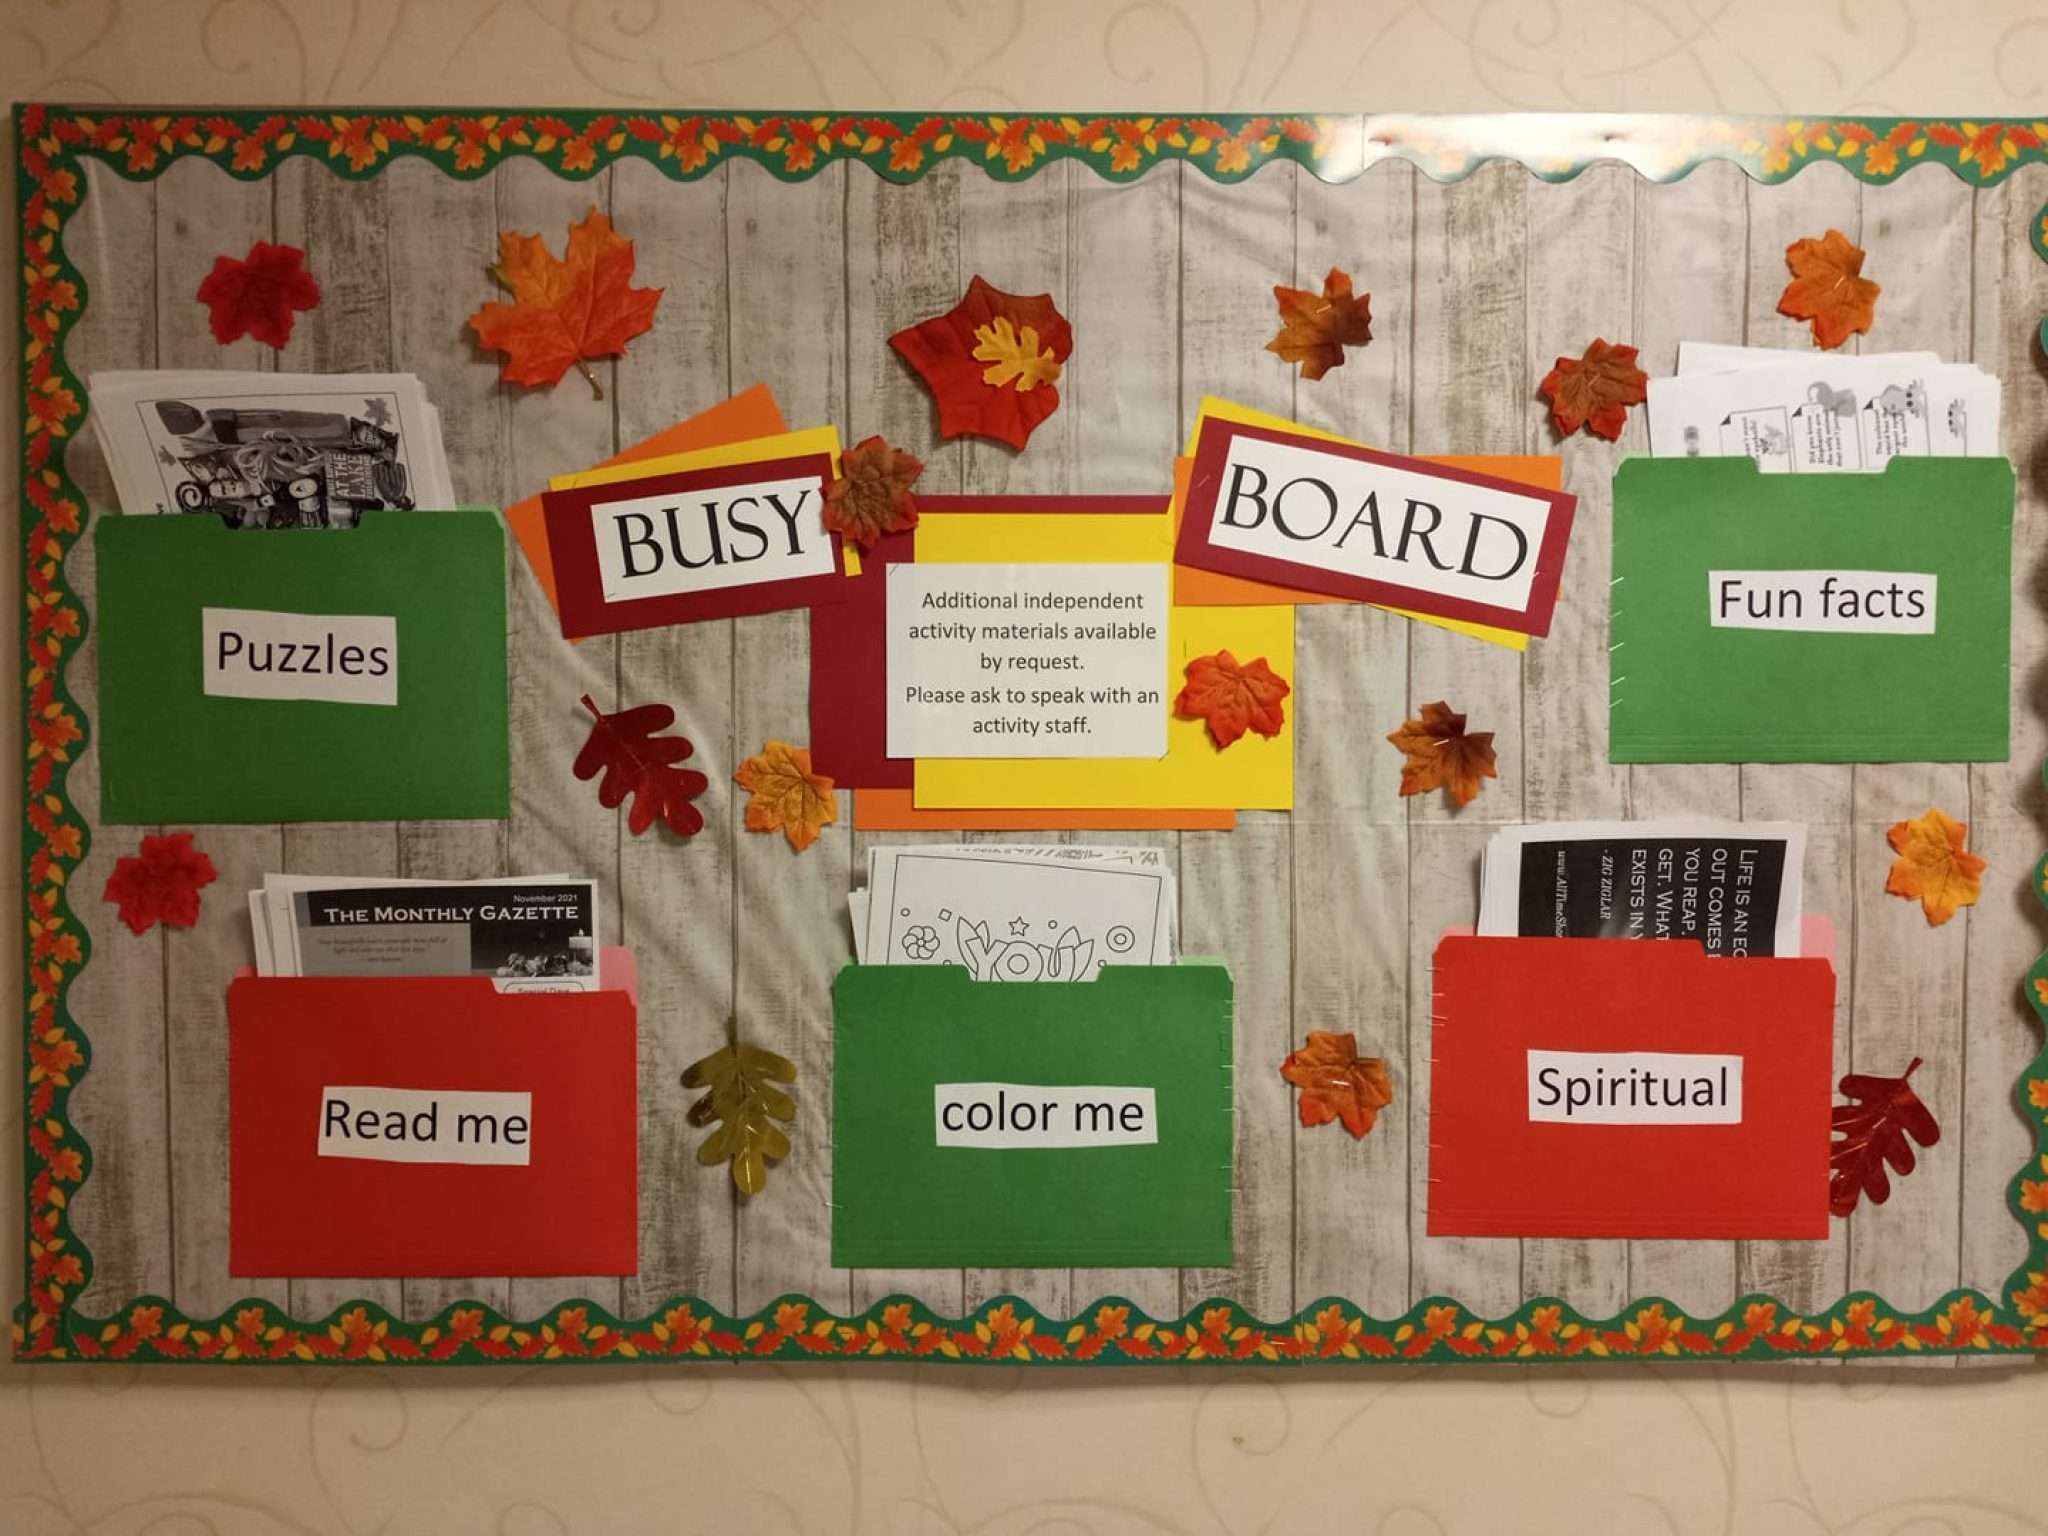 Busy Board: Activities for Seniors